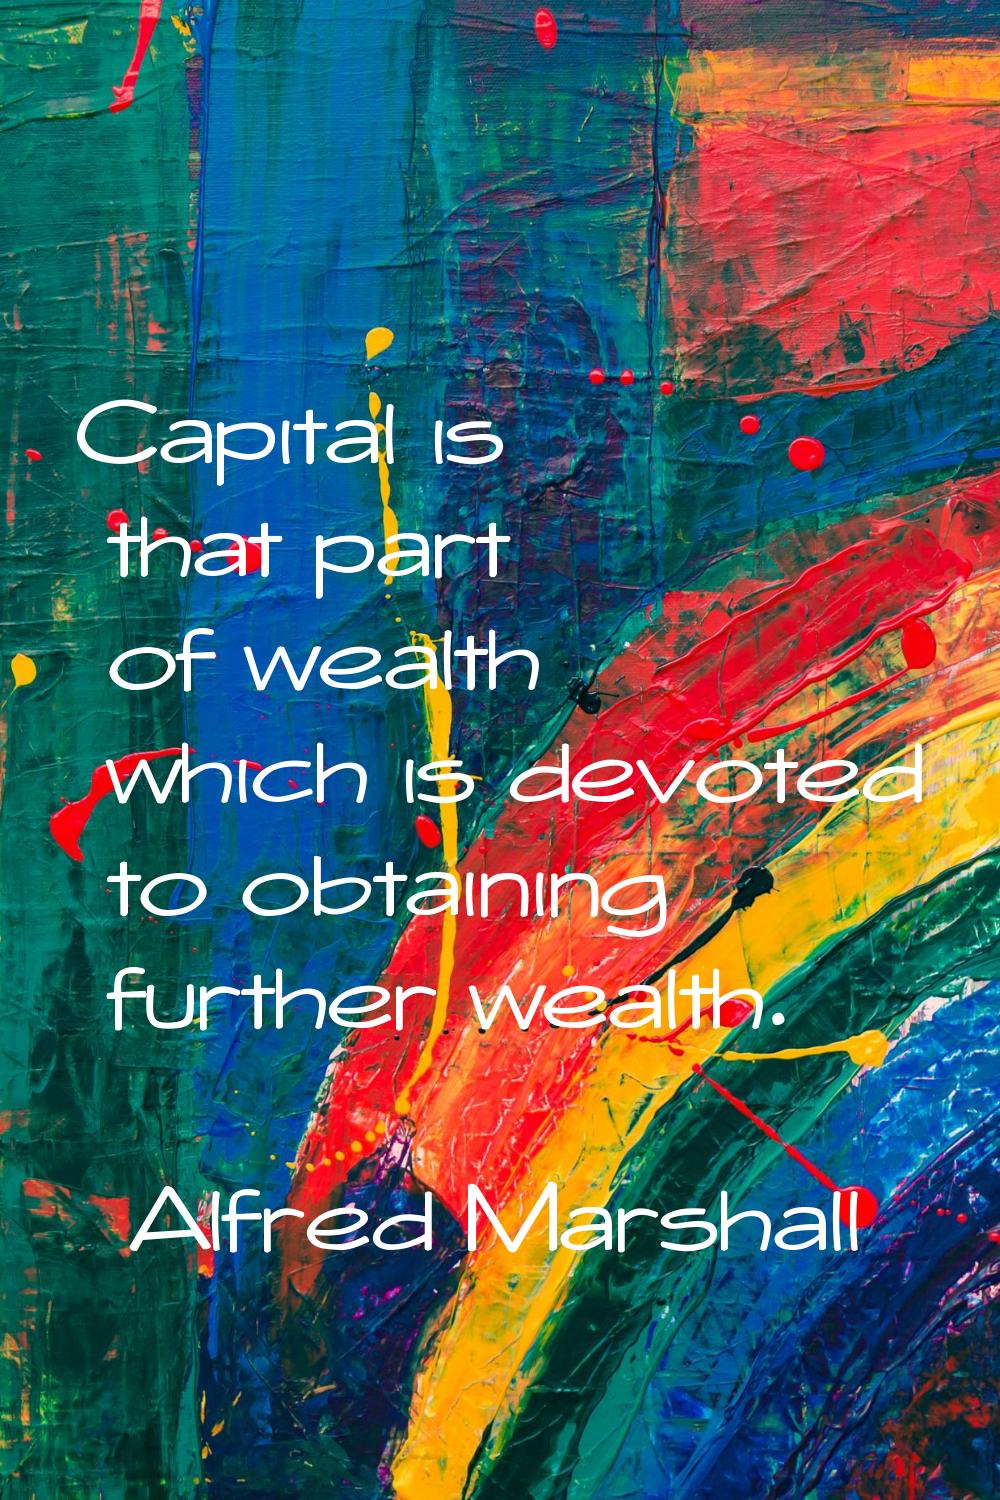 Capital is that part of wealth which is devoted to obtaining further wealth.